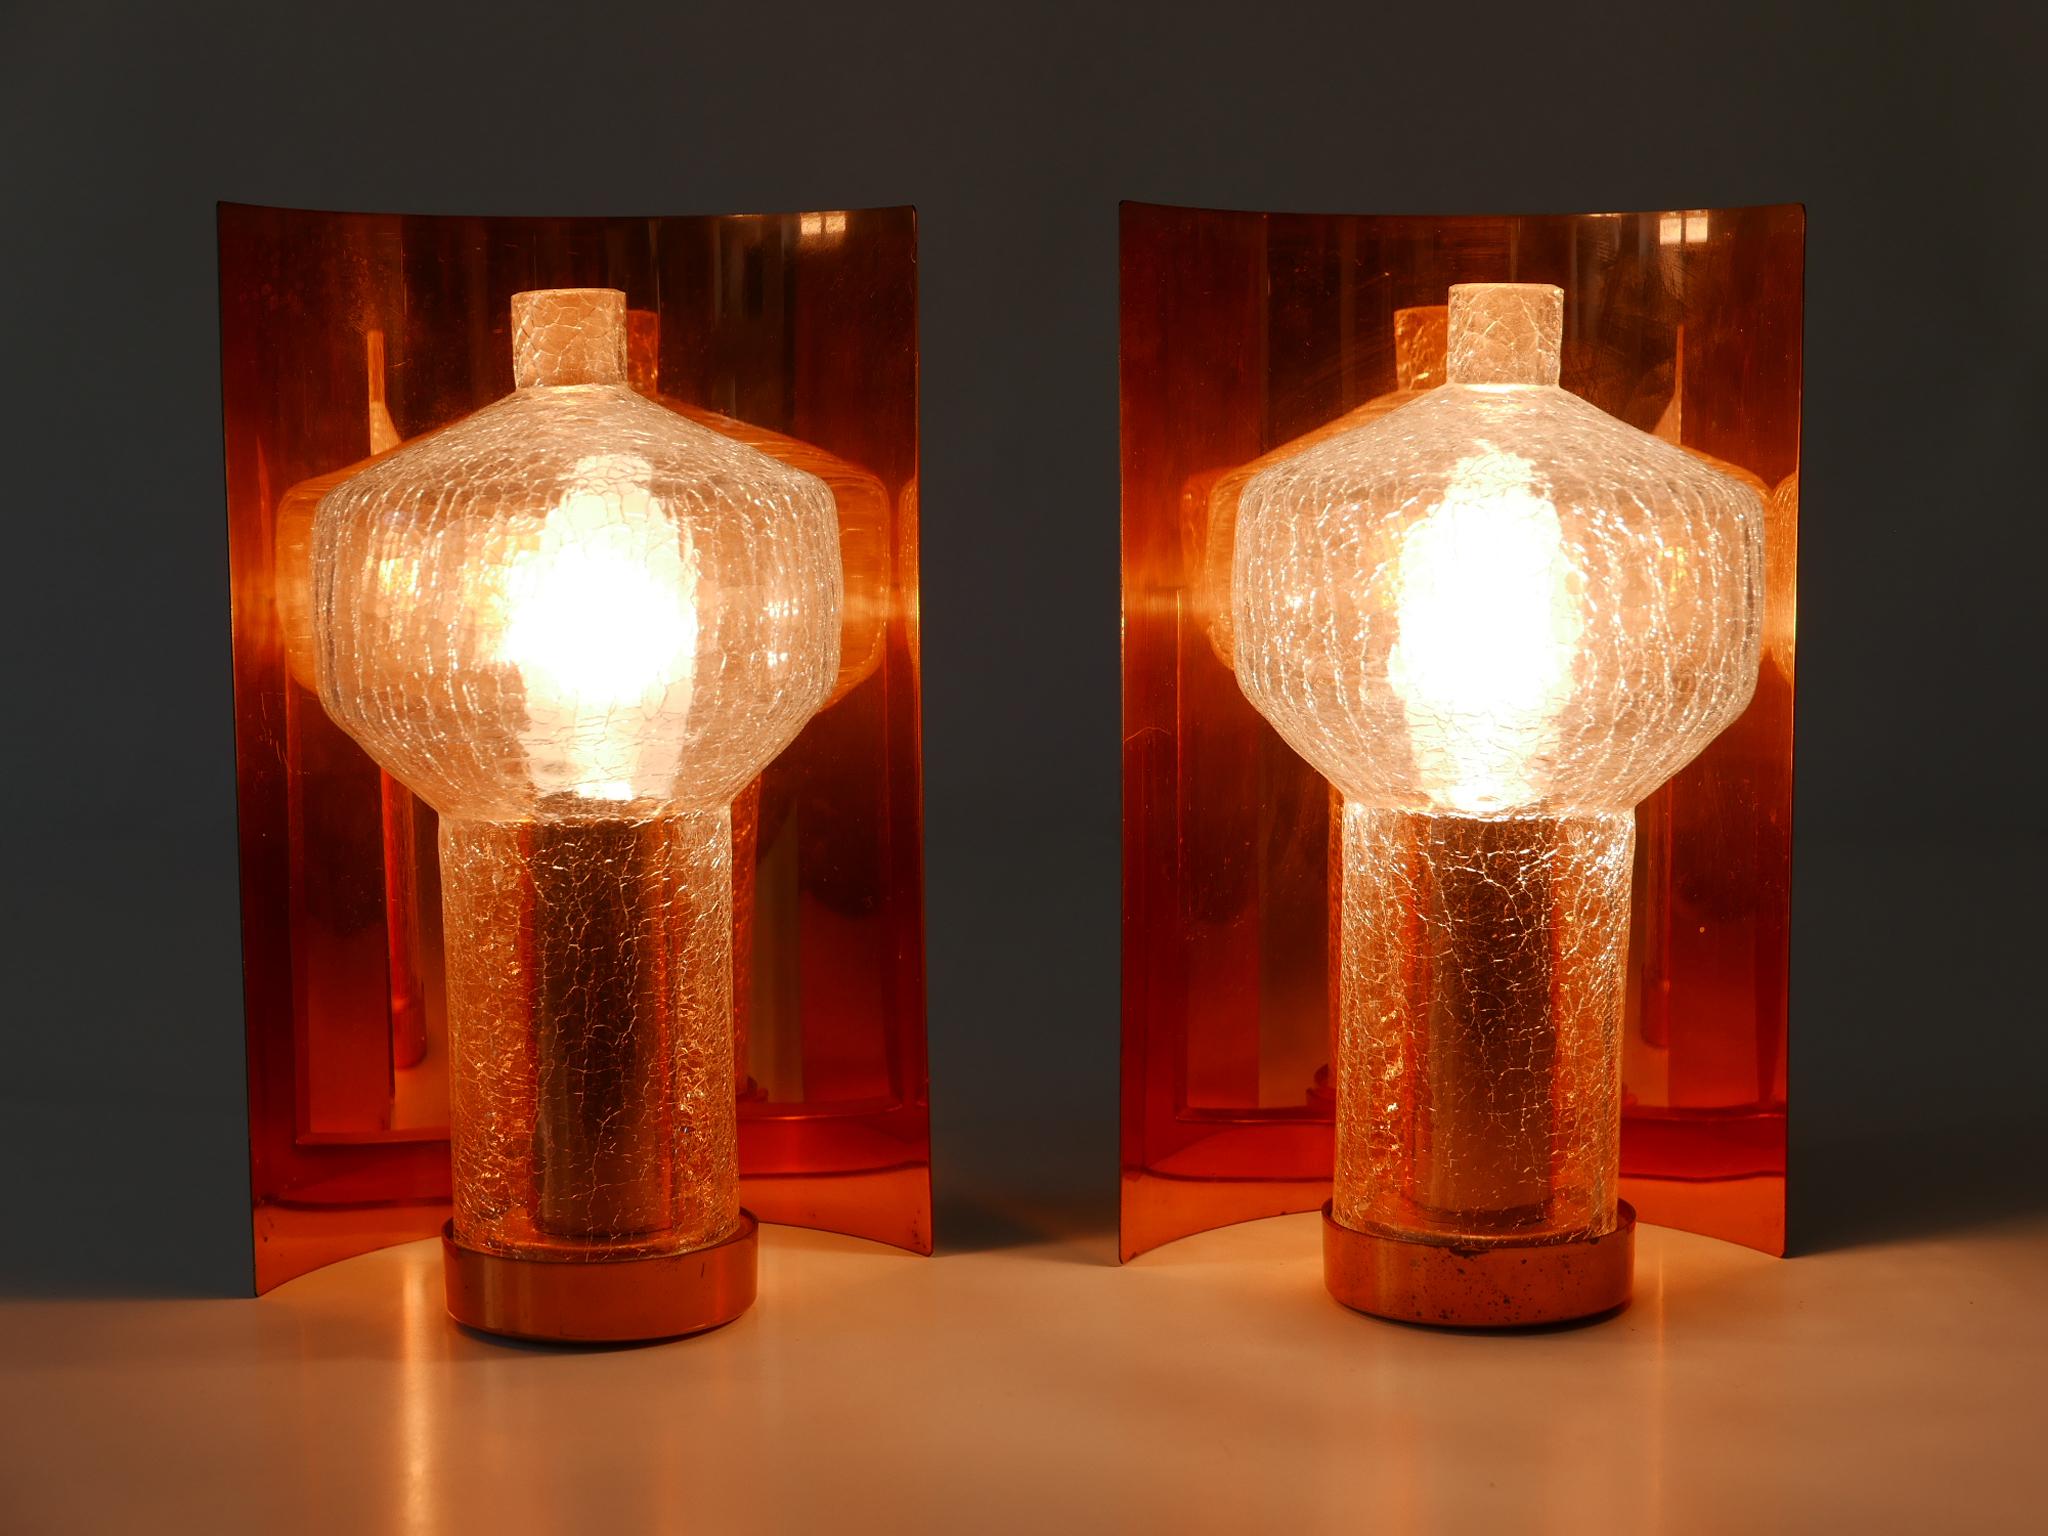 Set of two rare and elegant Mid-Century Modern sconces. Designed & manufactured by Kaiser Leuchten, Germany, 1960s.

Executed in copper and handblown craquelé glass, each lamp comes with 1 x E14 / E12 Edison screw fit bulb holder, is wired, in